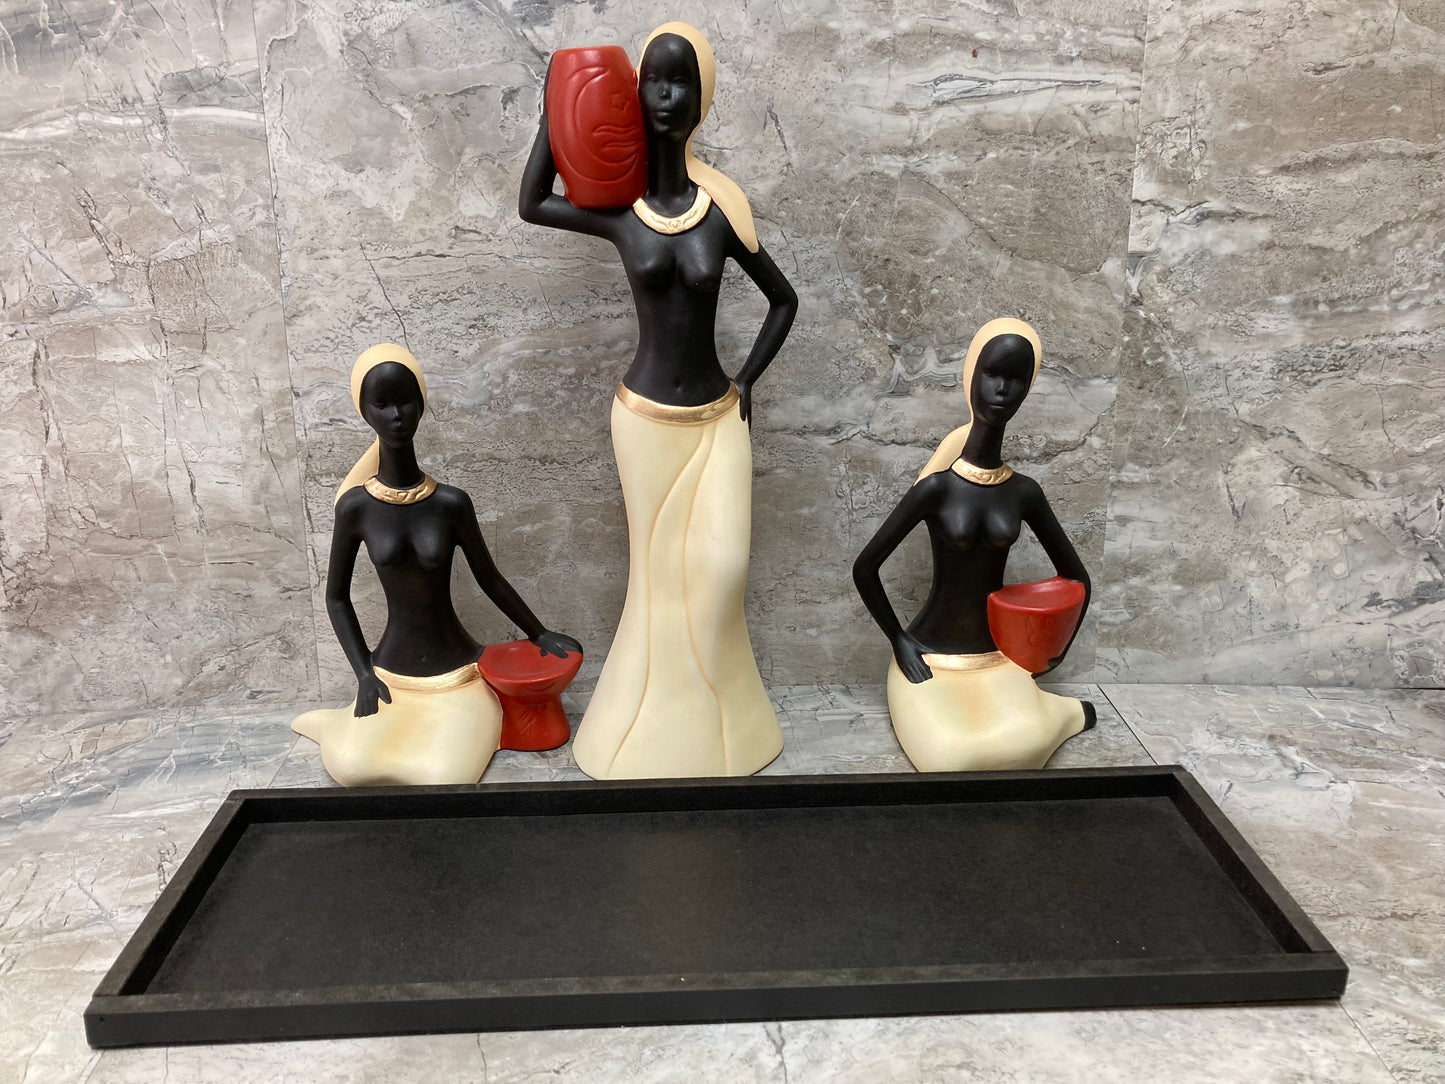 3 pcs Ceramic African Ladies statute figurine  with Wooden base Beige color Home decor